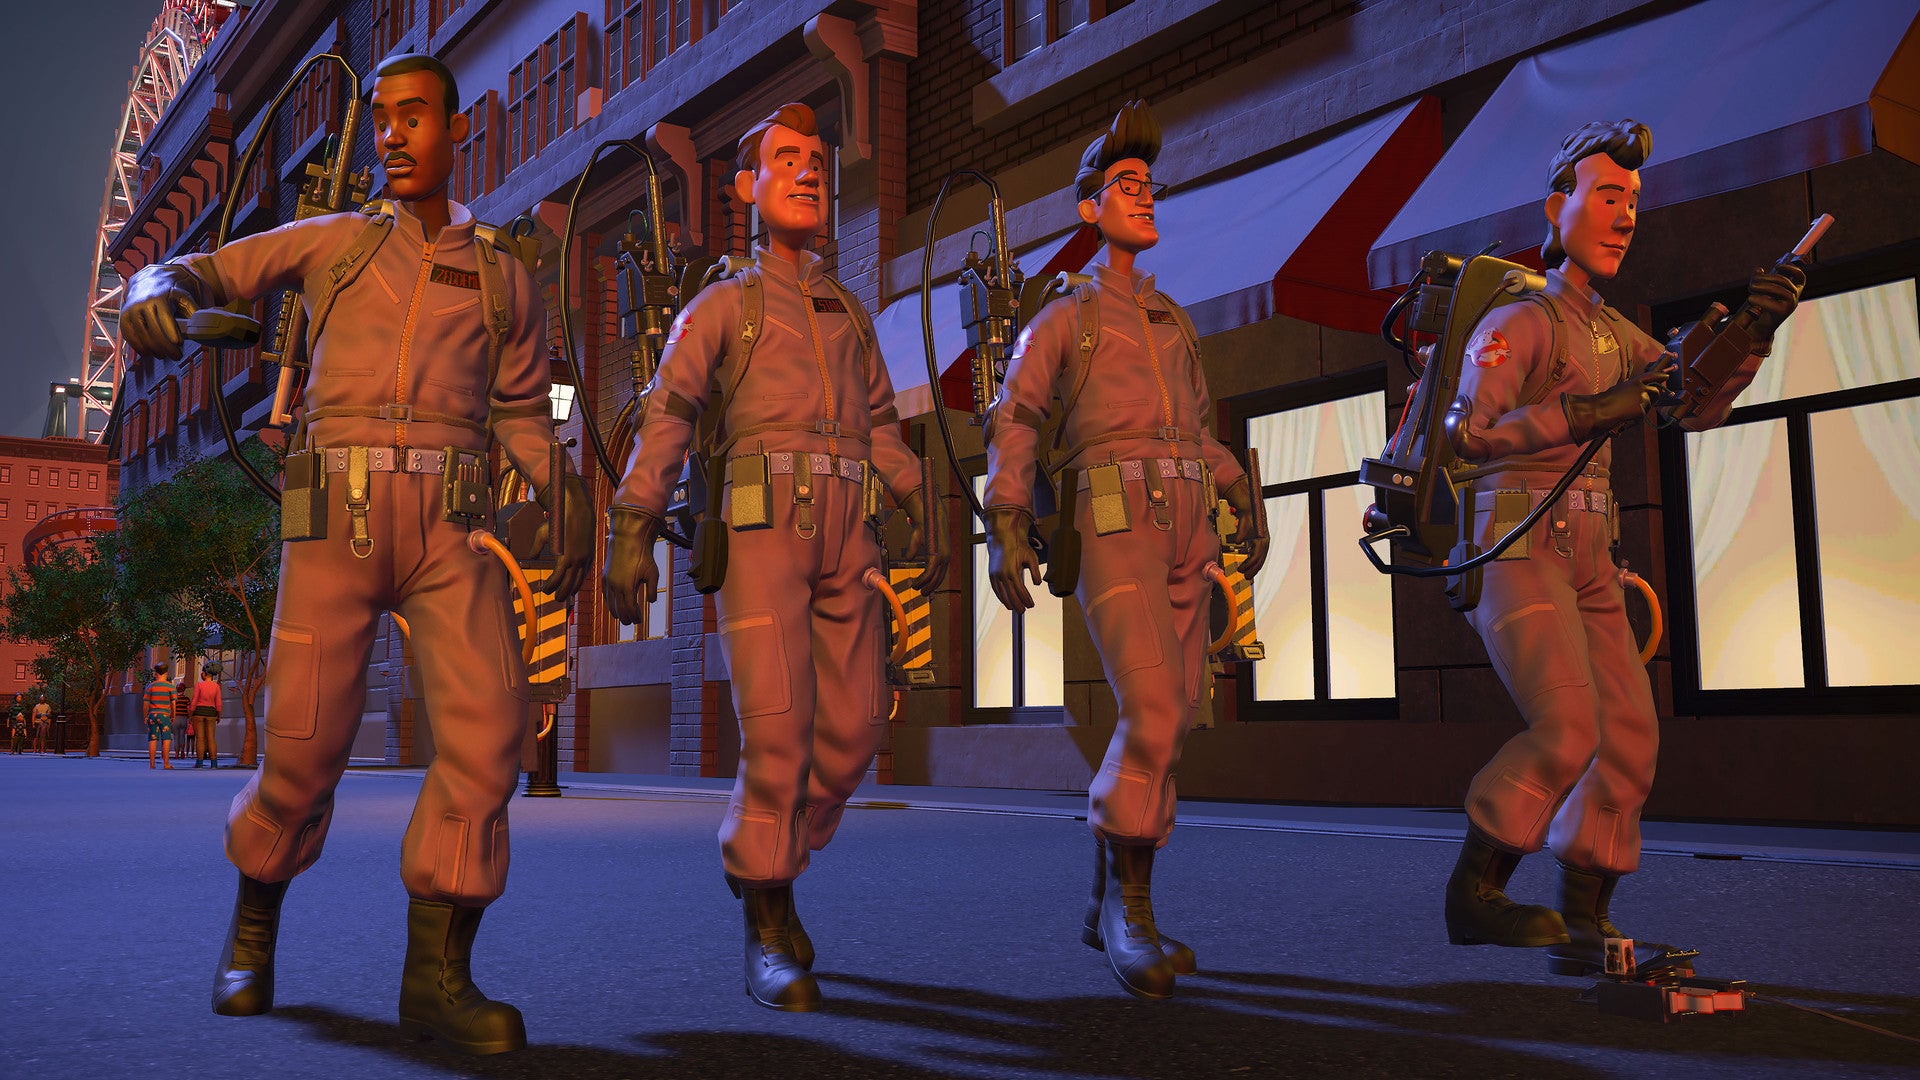 Planet Coaster: Ghostbusters DLC